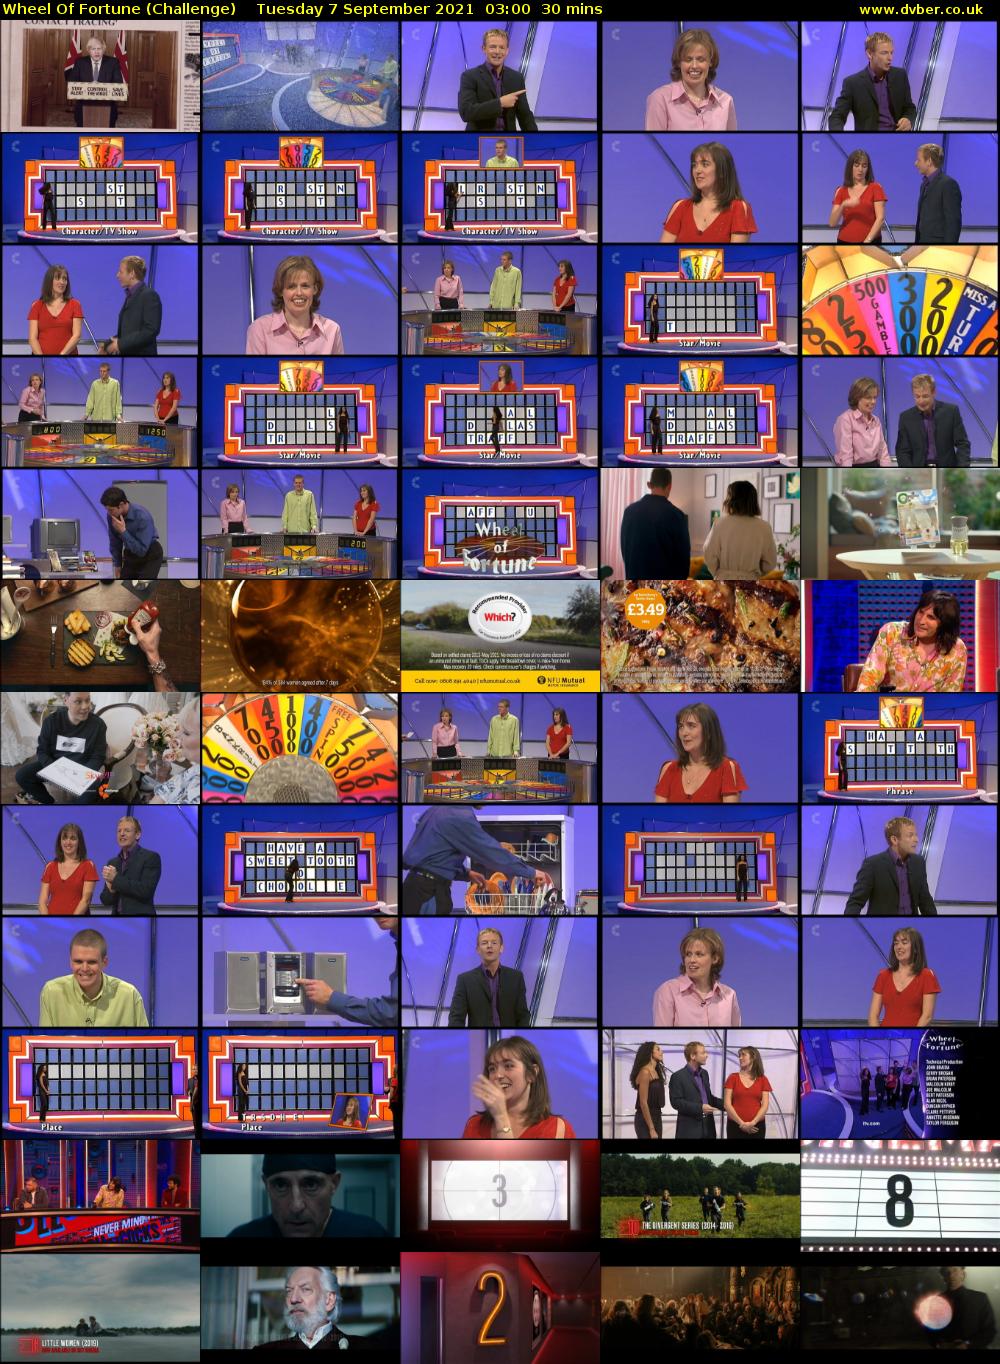 Wheel Of Fortune (Challenge) Tuesday 7 September 2021 04:00 - 04:30